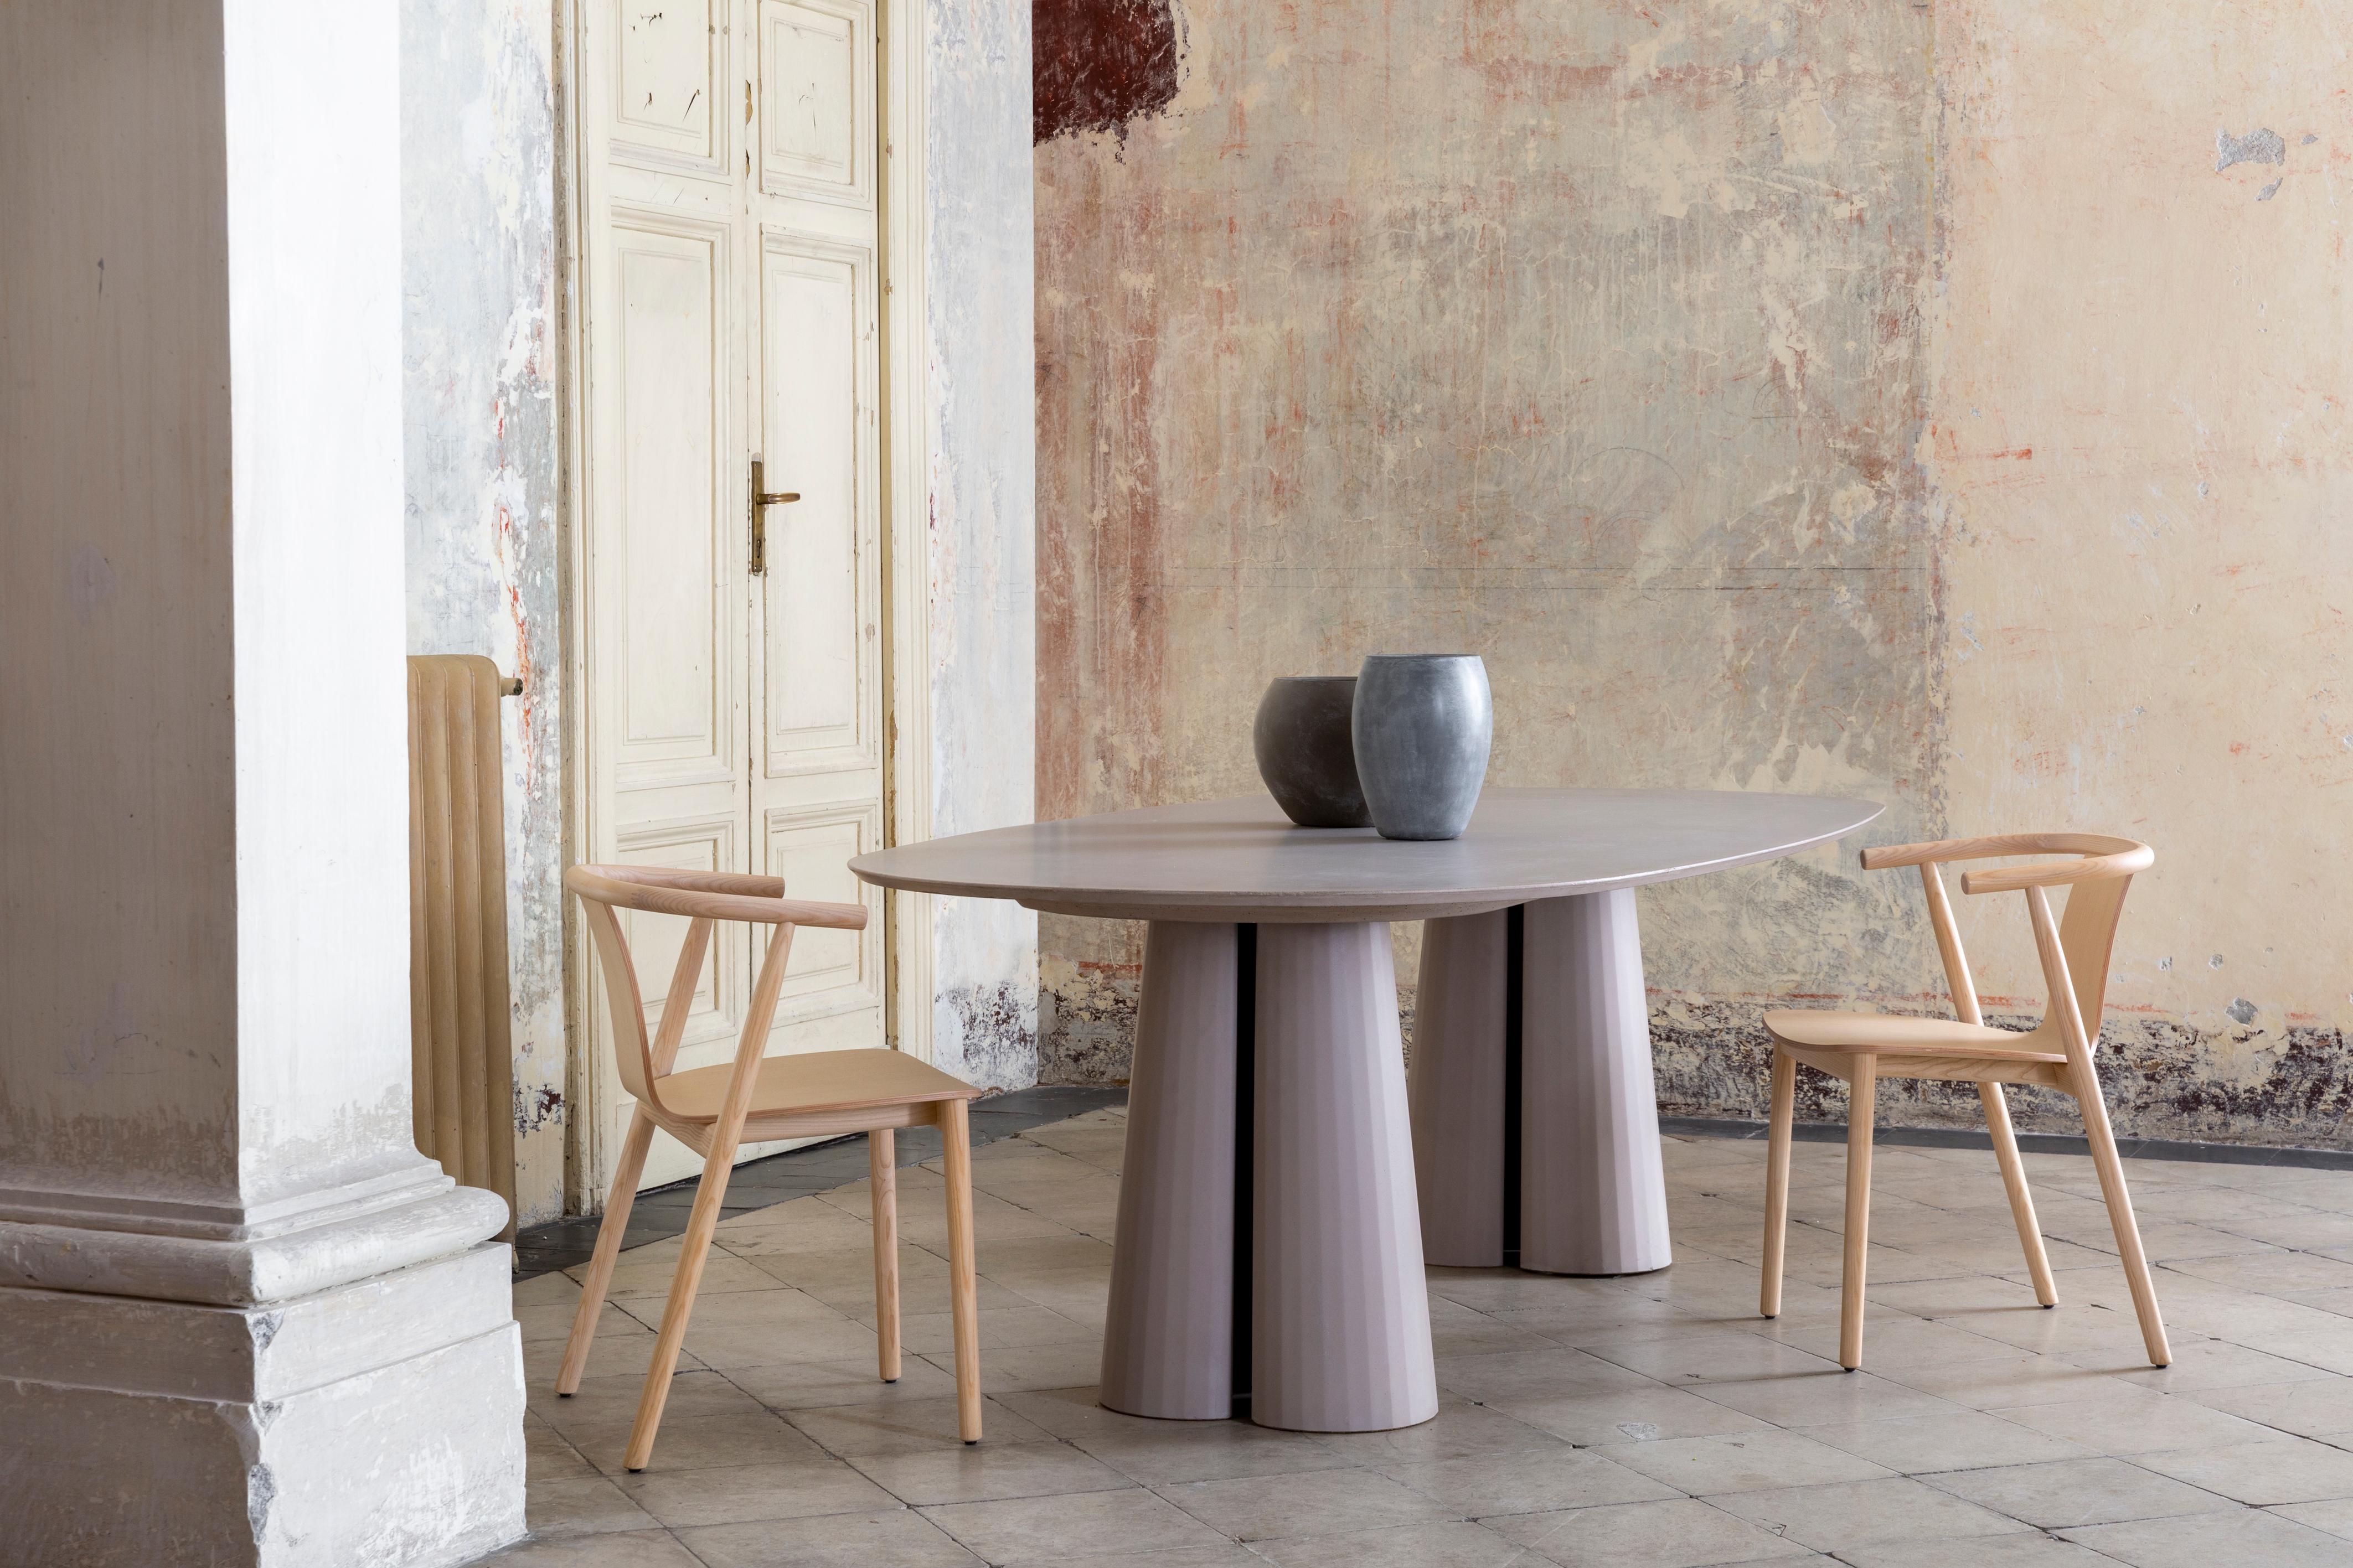 Classical Roman 21st Century Concrete Oval Shape Table Powder Cement Color Handmade in Italy For Sale